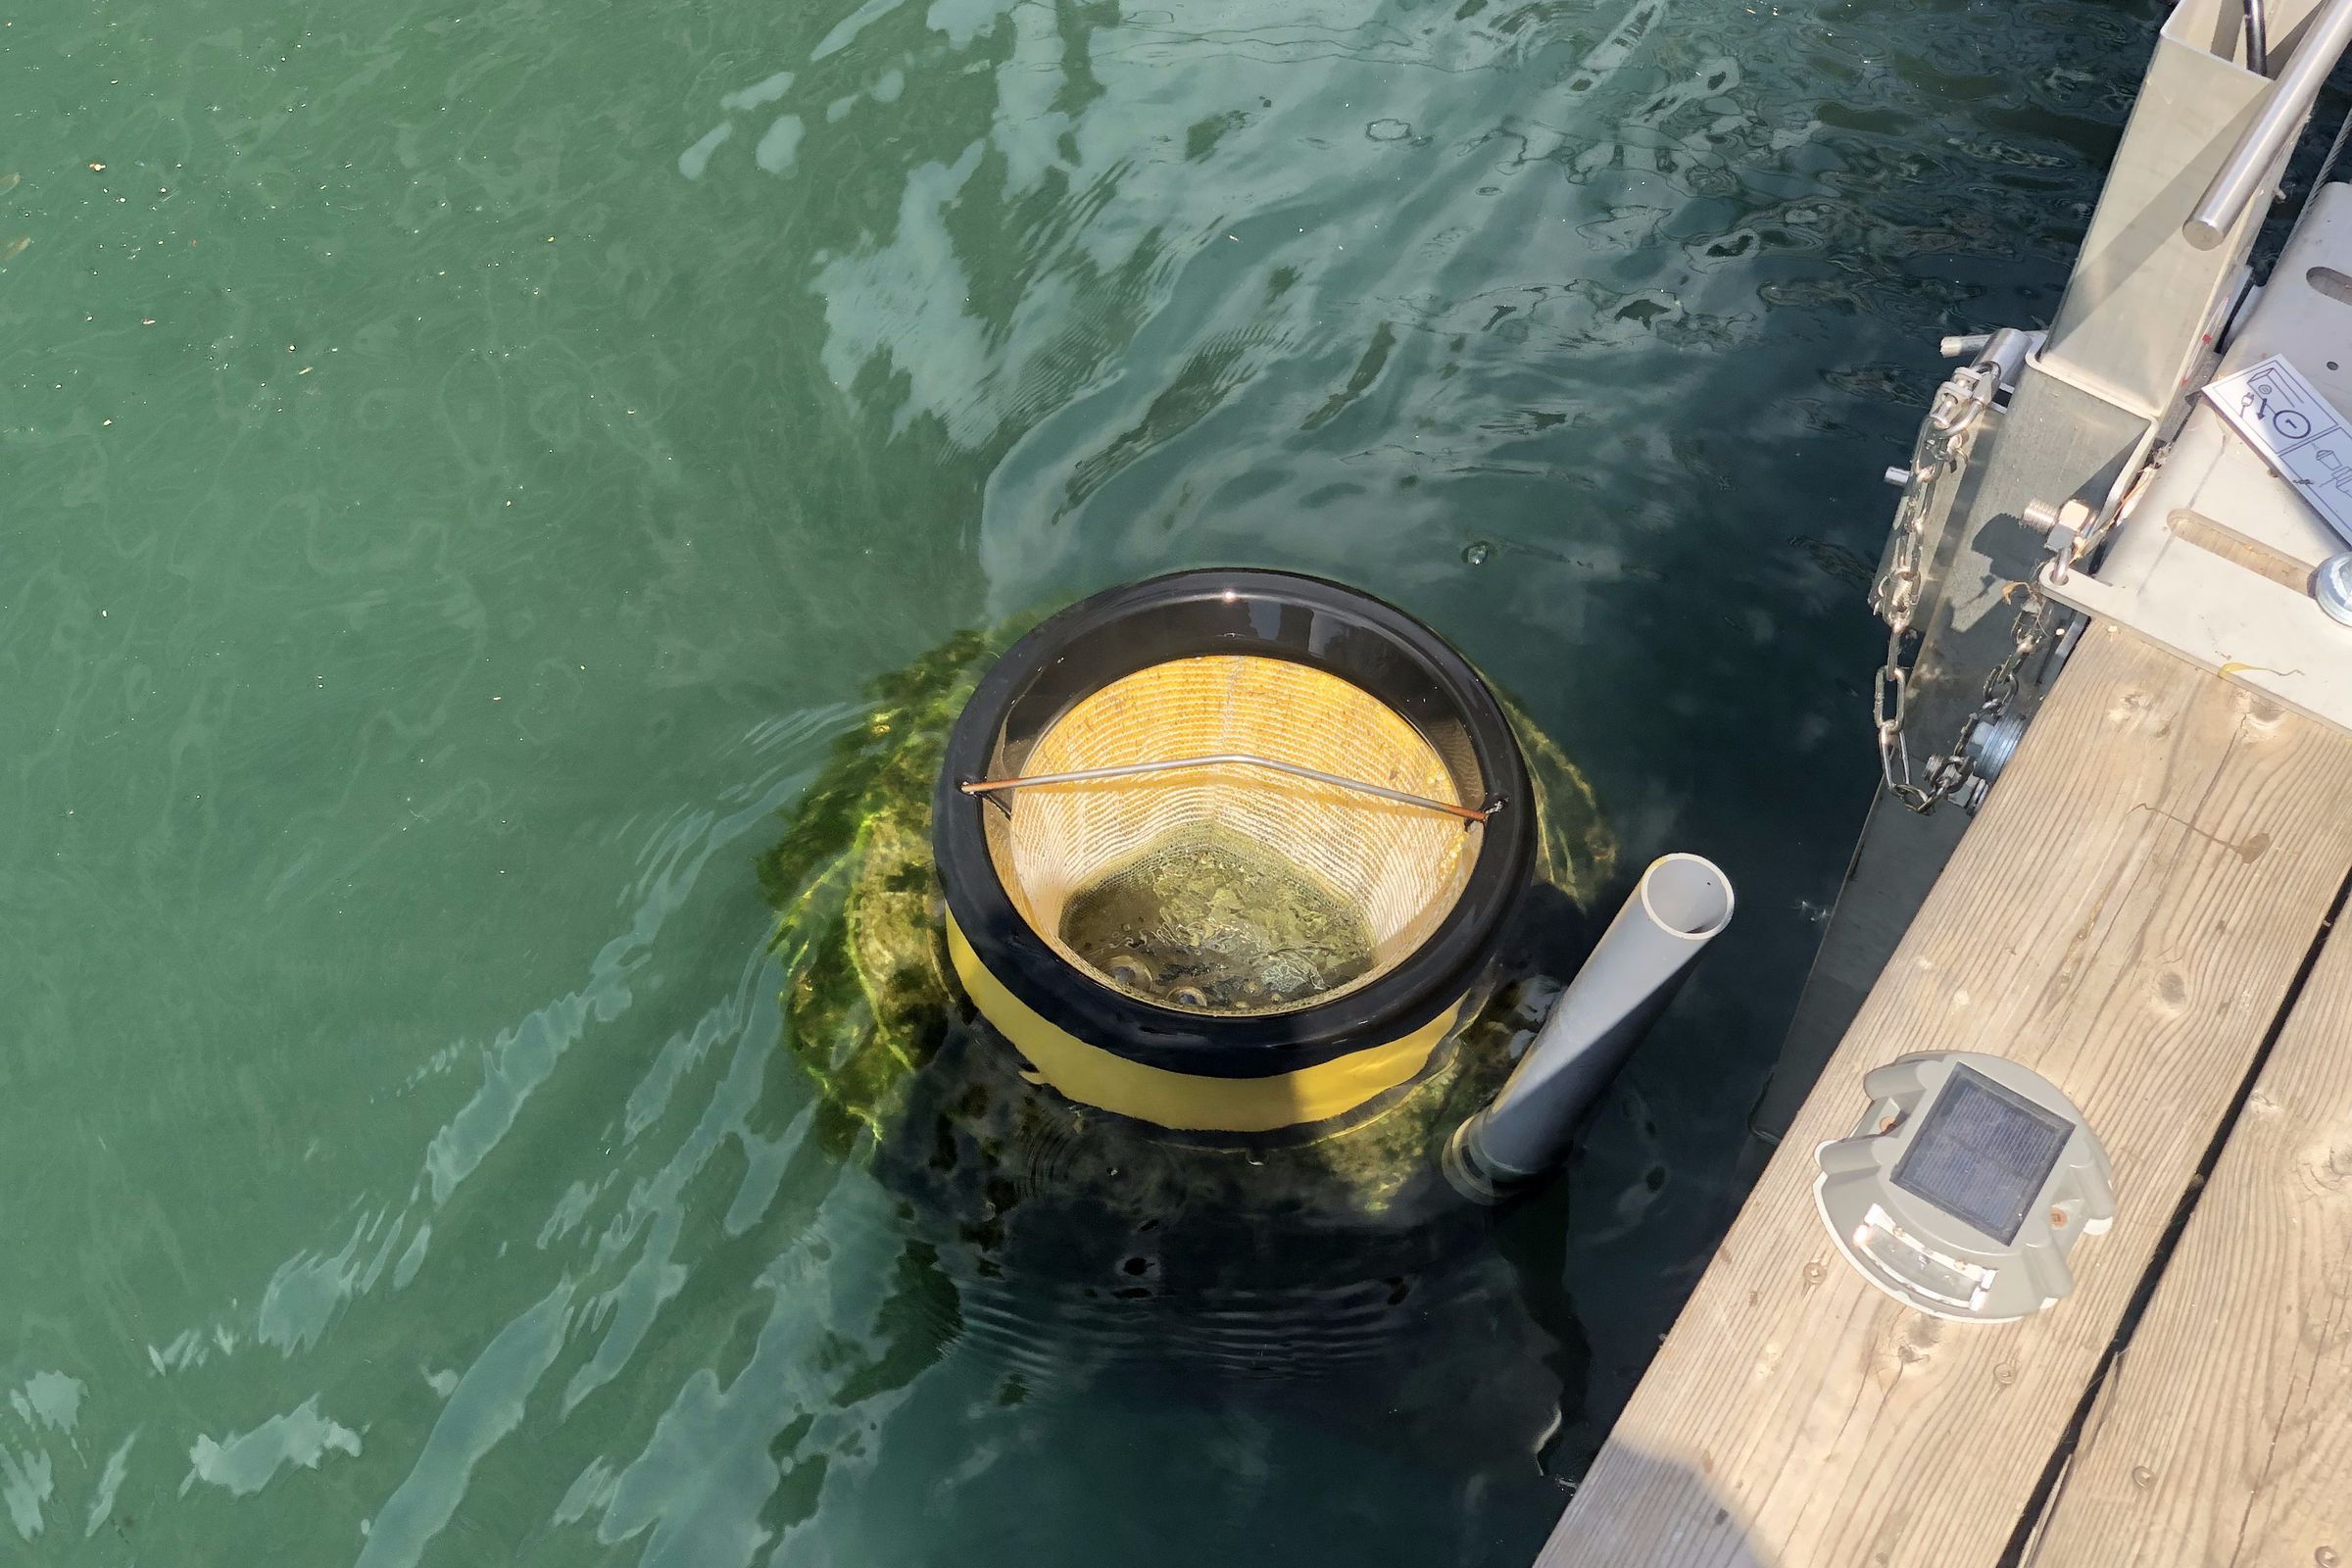 A yellow bin floats in the water next to a wooden dock